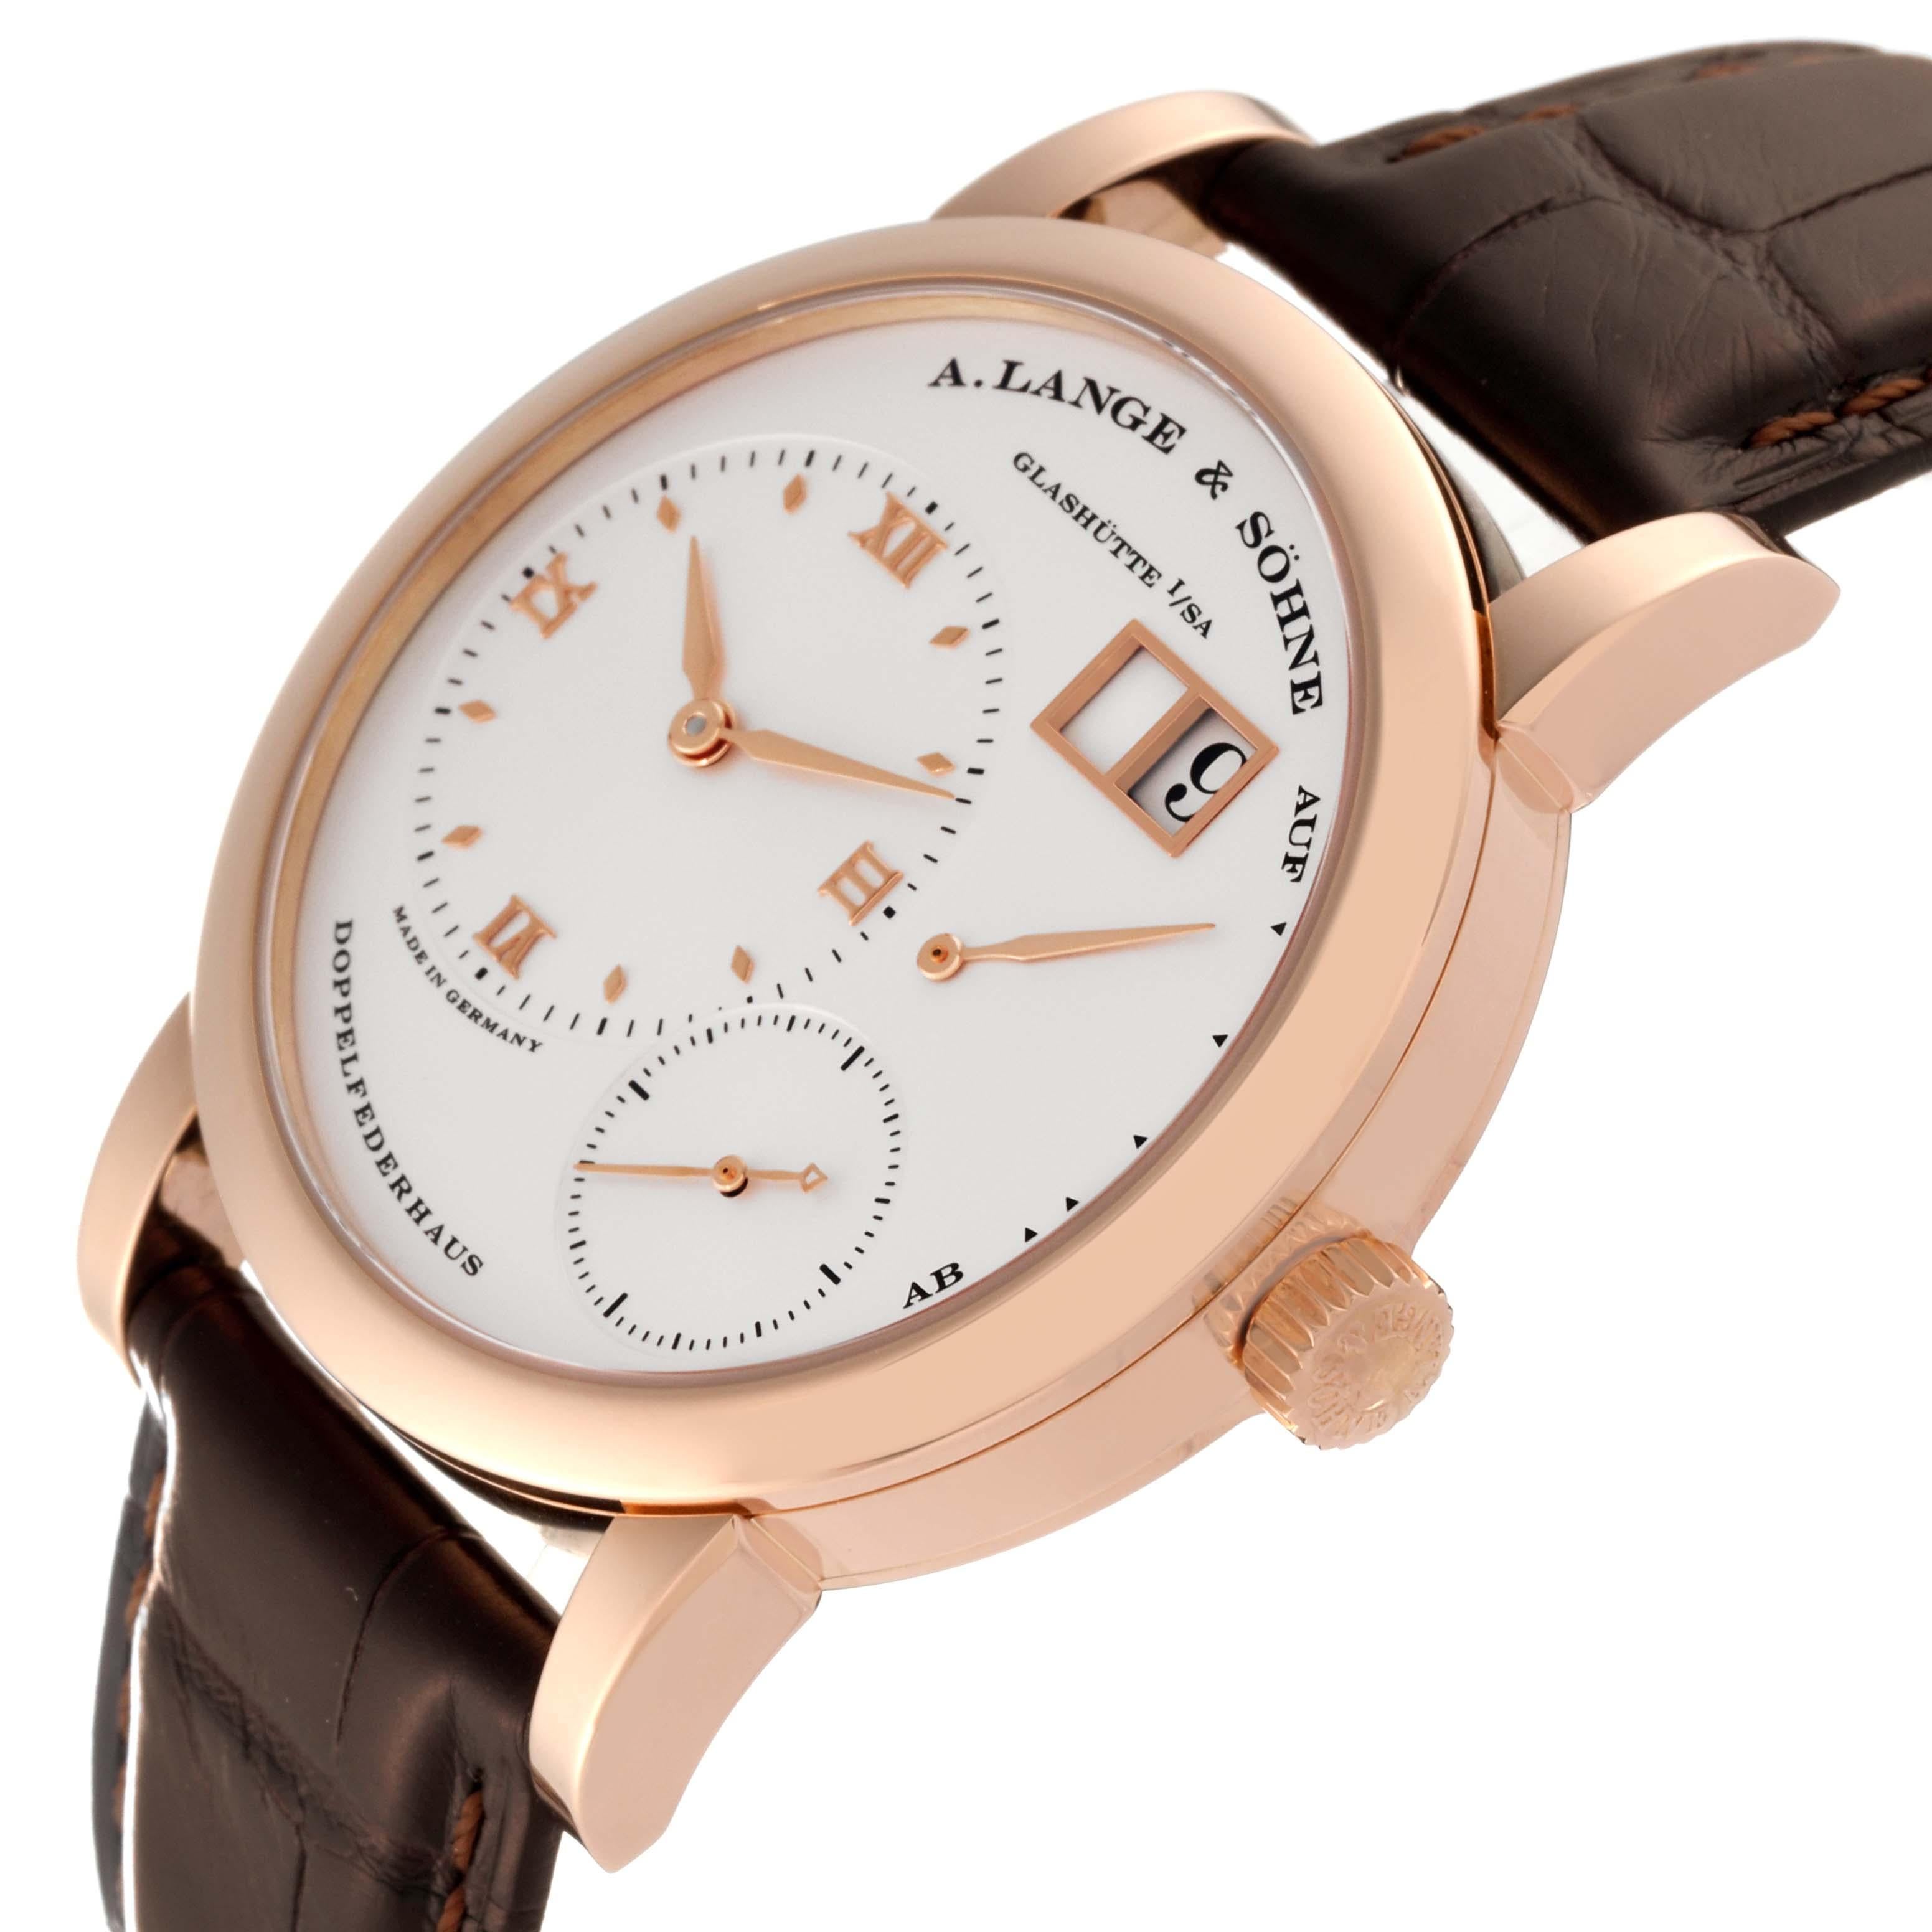 A. Lange and Sohne Lange 1 Rose Gold Silver Dial Mens Watch 101.032 Box Papers. Manual-winding movement. 18K rose gold case 38.5 mm in diameter.  Case thickness 10.4mm. Transparent exhibition sapphire crystal caseback. Quick date-correction button